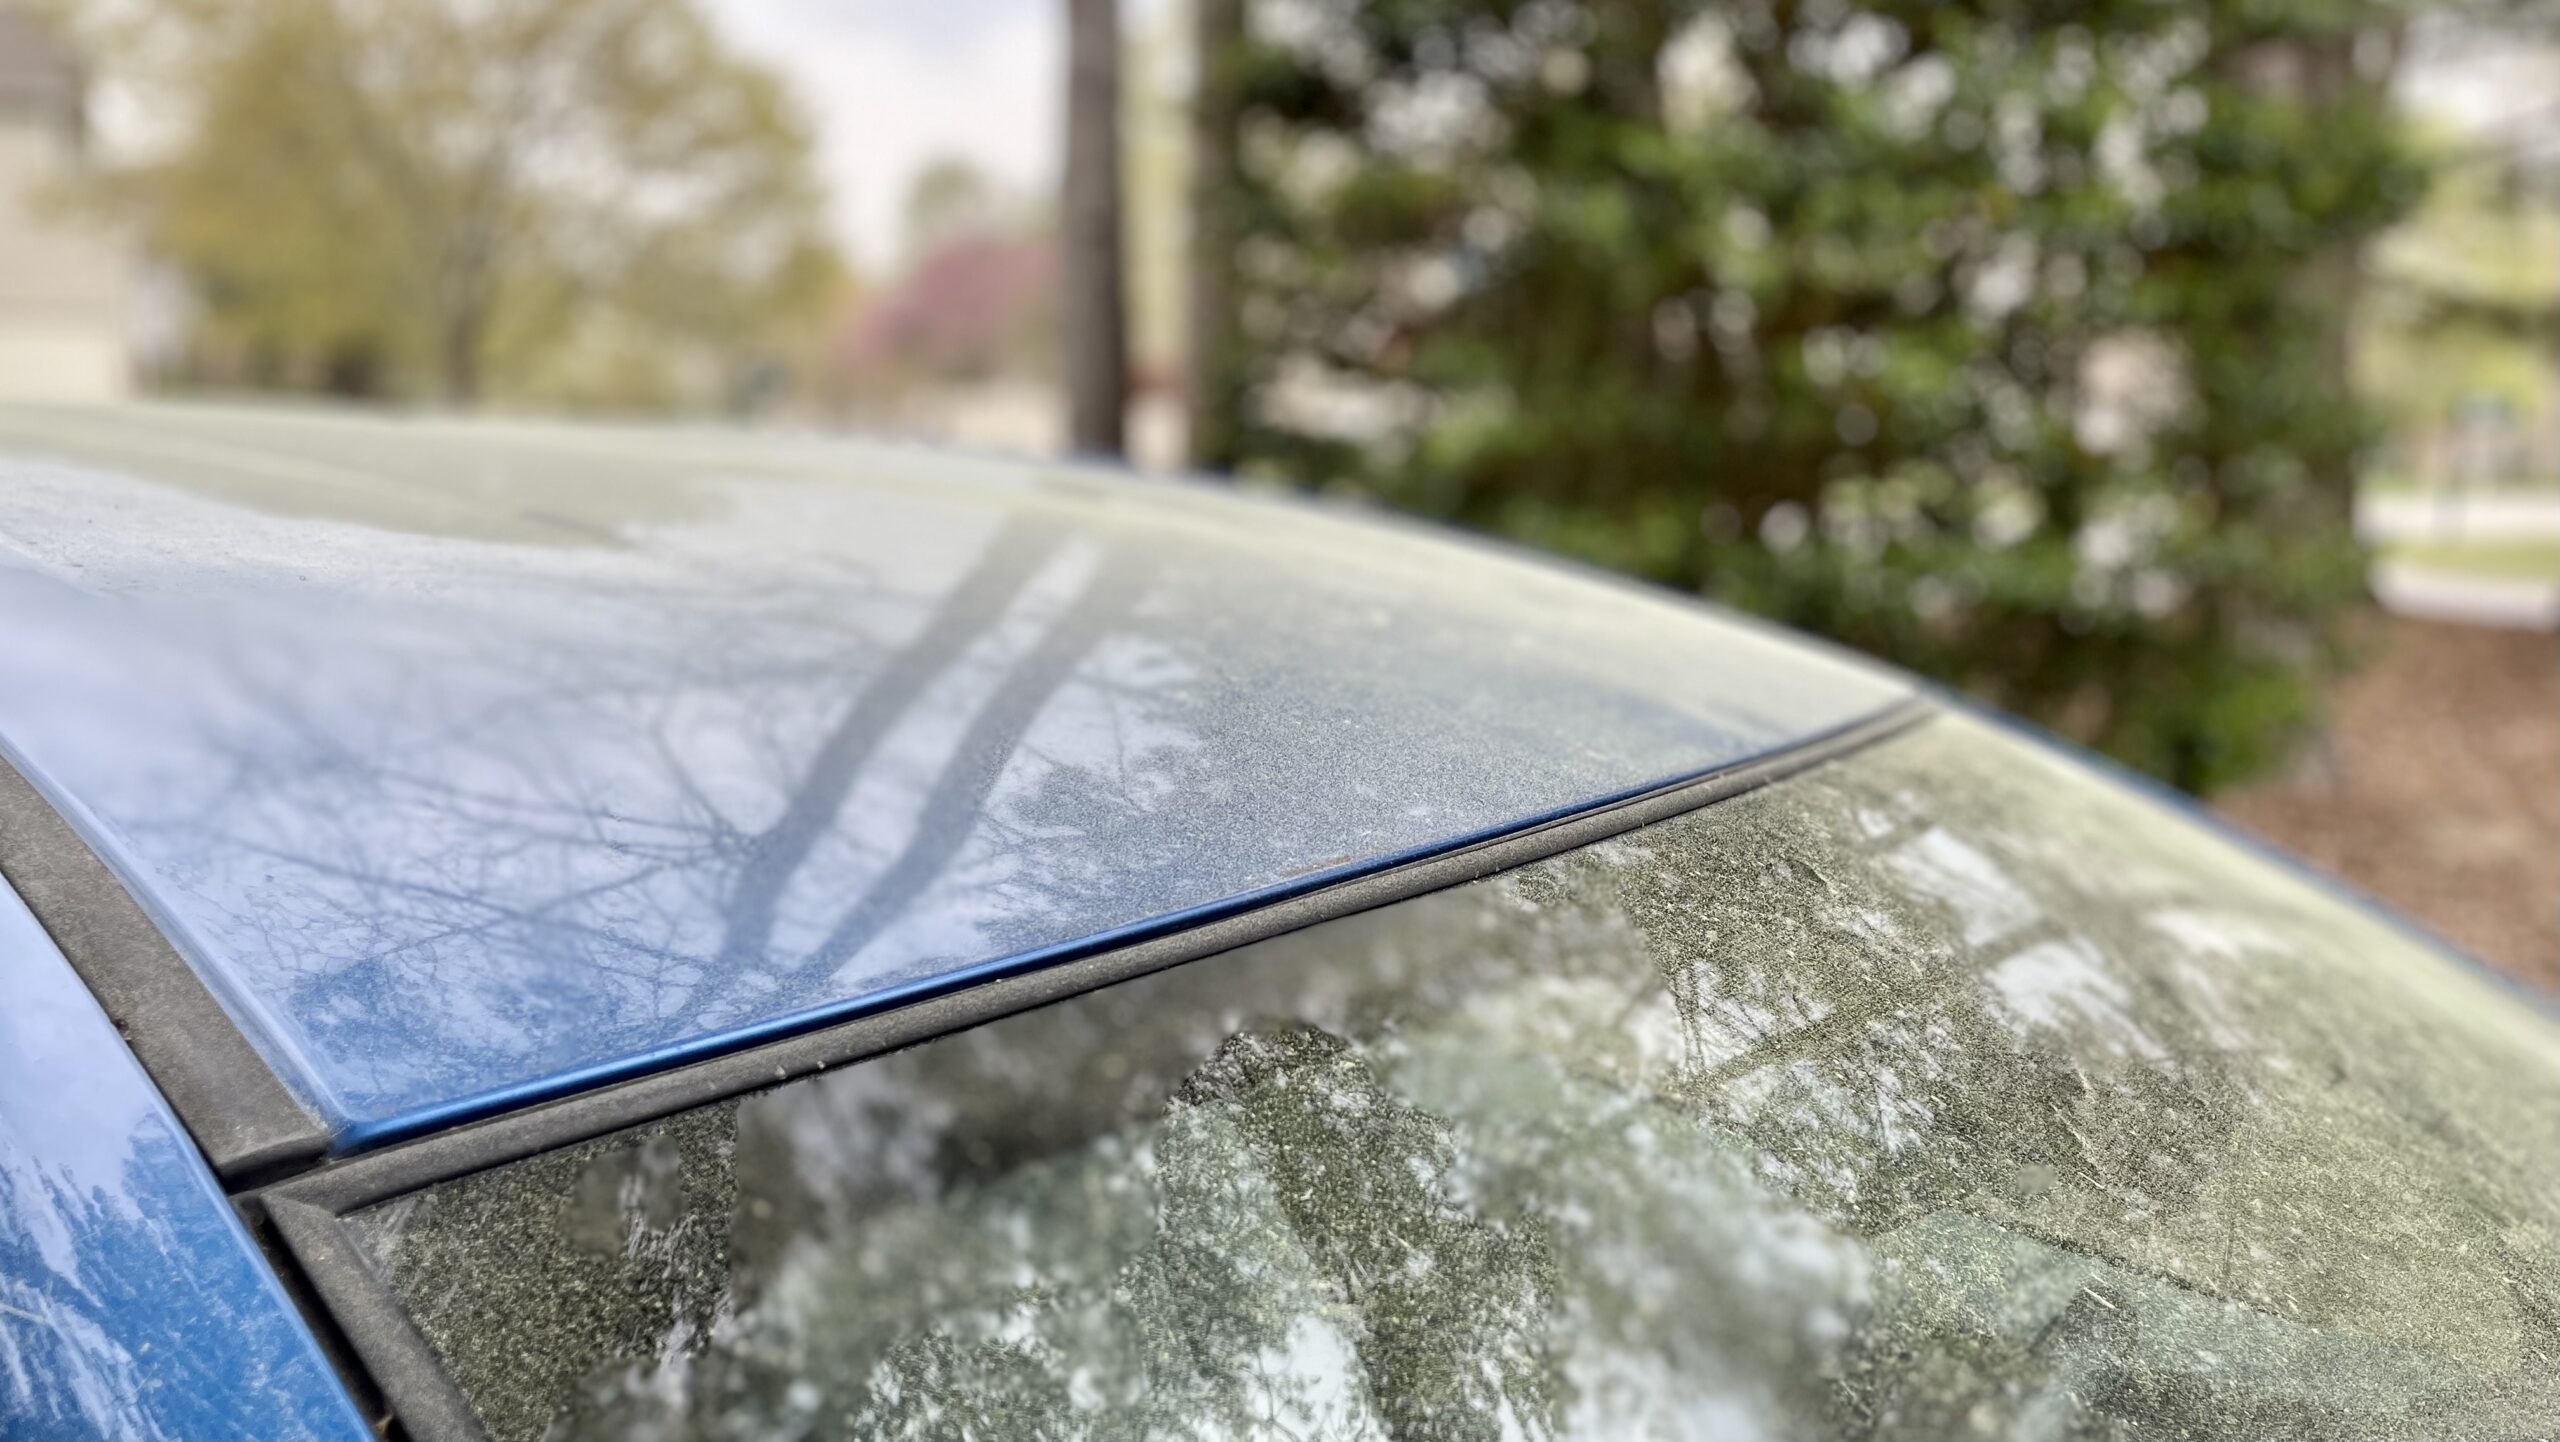 The hood and front window of a blue car is coated with yellow pollen.